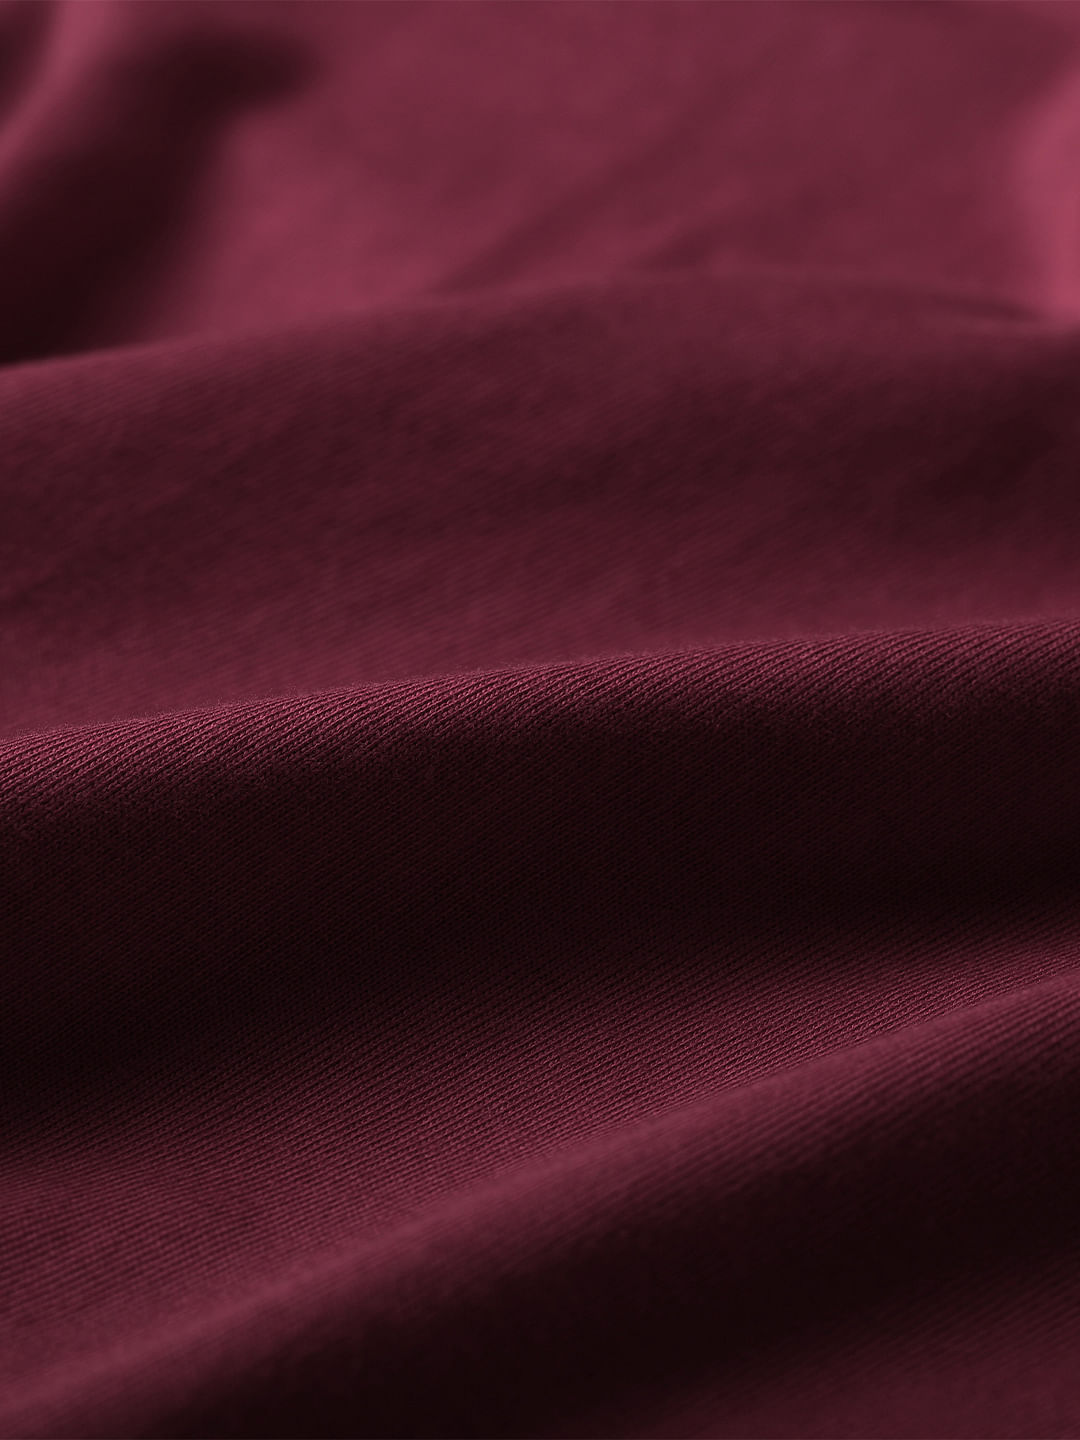 Buy Solids: Burgundy Wine Half Sleeve T-Shirts online at The Souled Store.